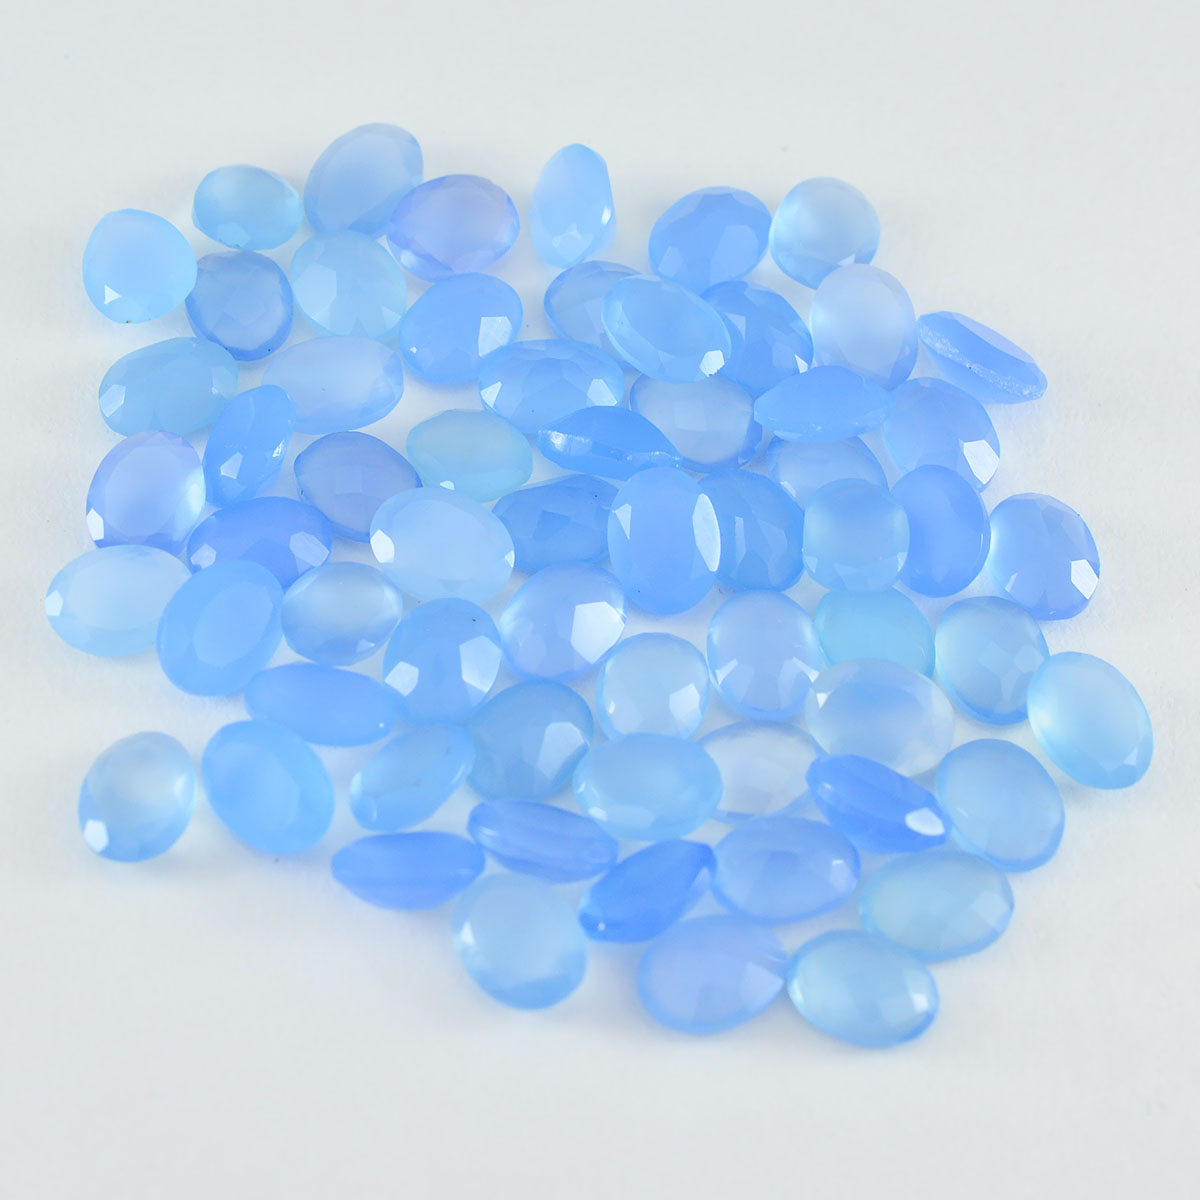 Riyogems 1PC Genuine Blue Chalcedony Faceted 3x5 mm Oval Shape attractive Quality Loose Gem